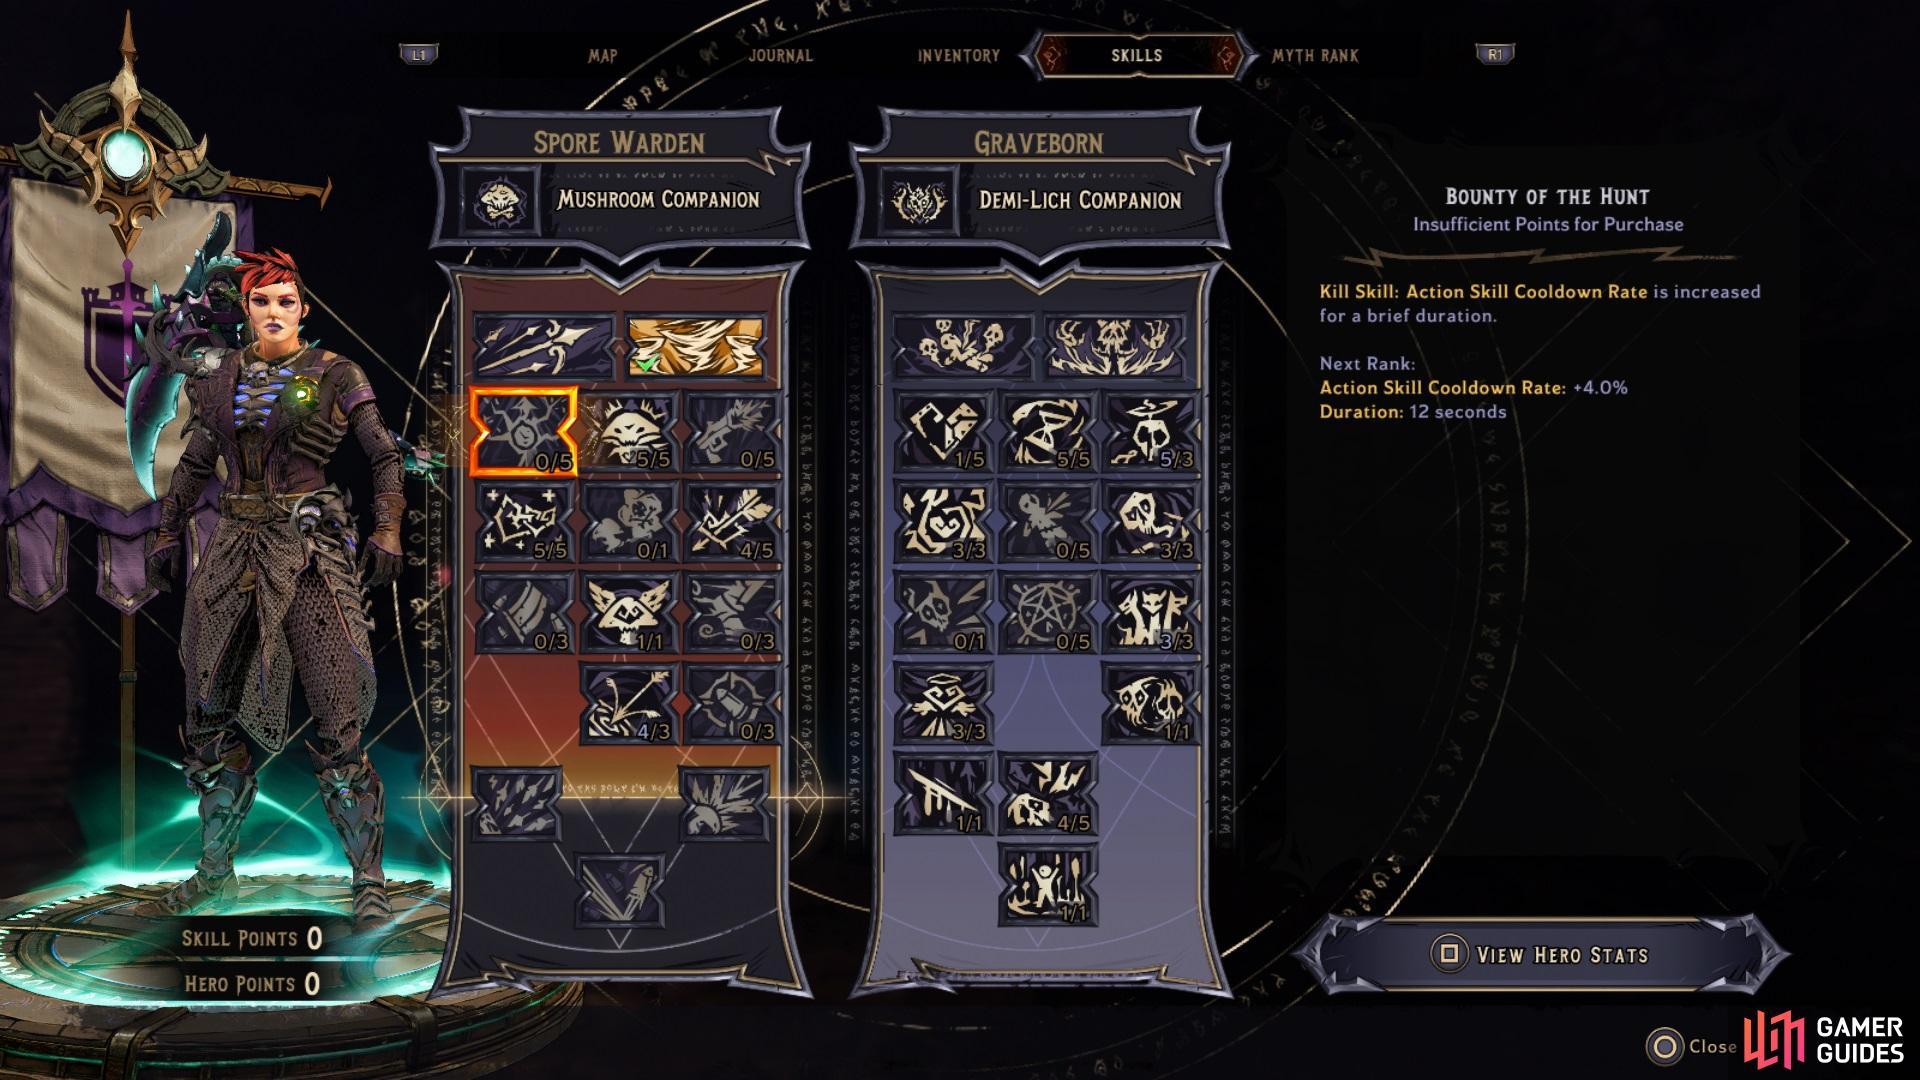 The skill trees for this build